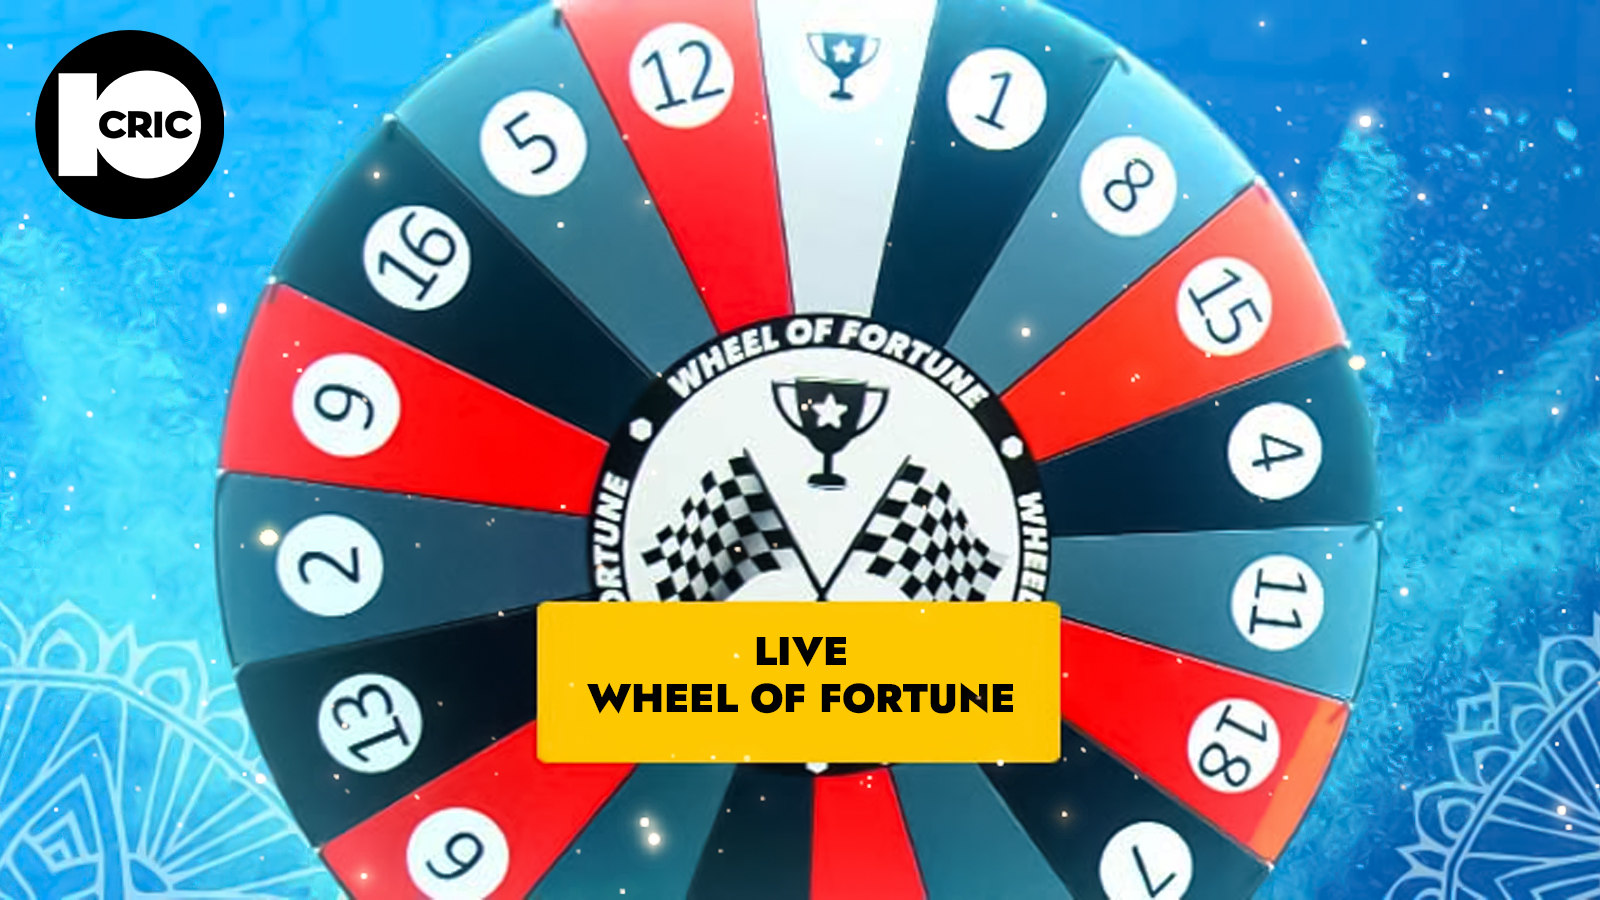 Play Wheel of Fortune in live section of 10cric.